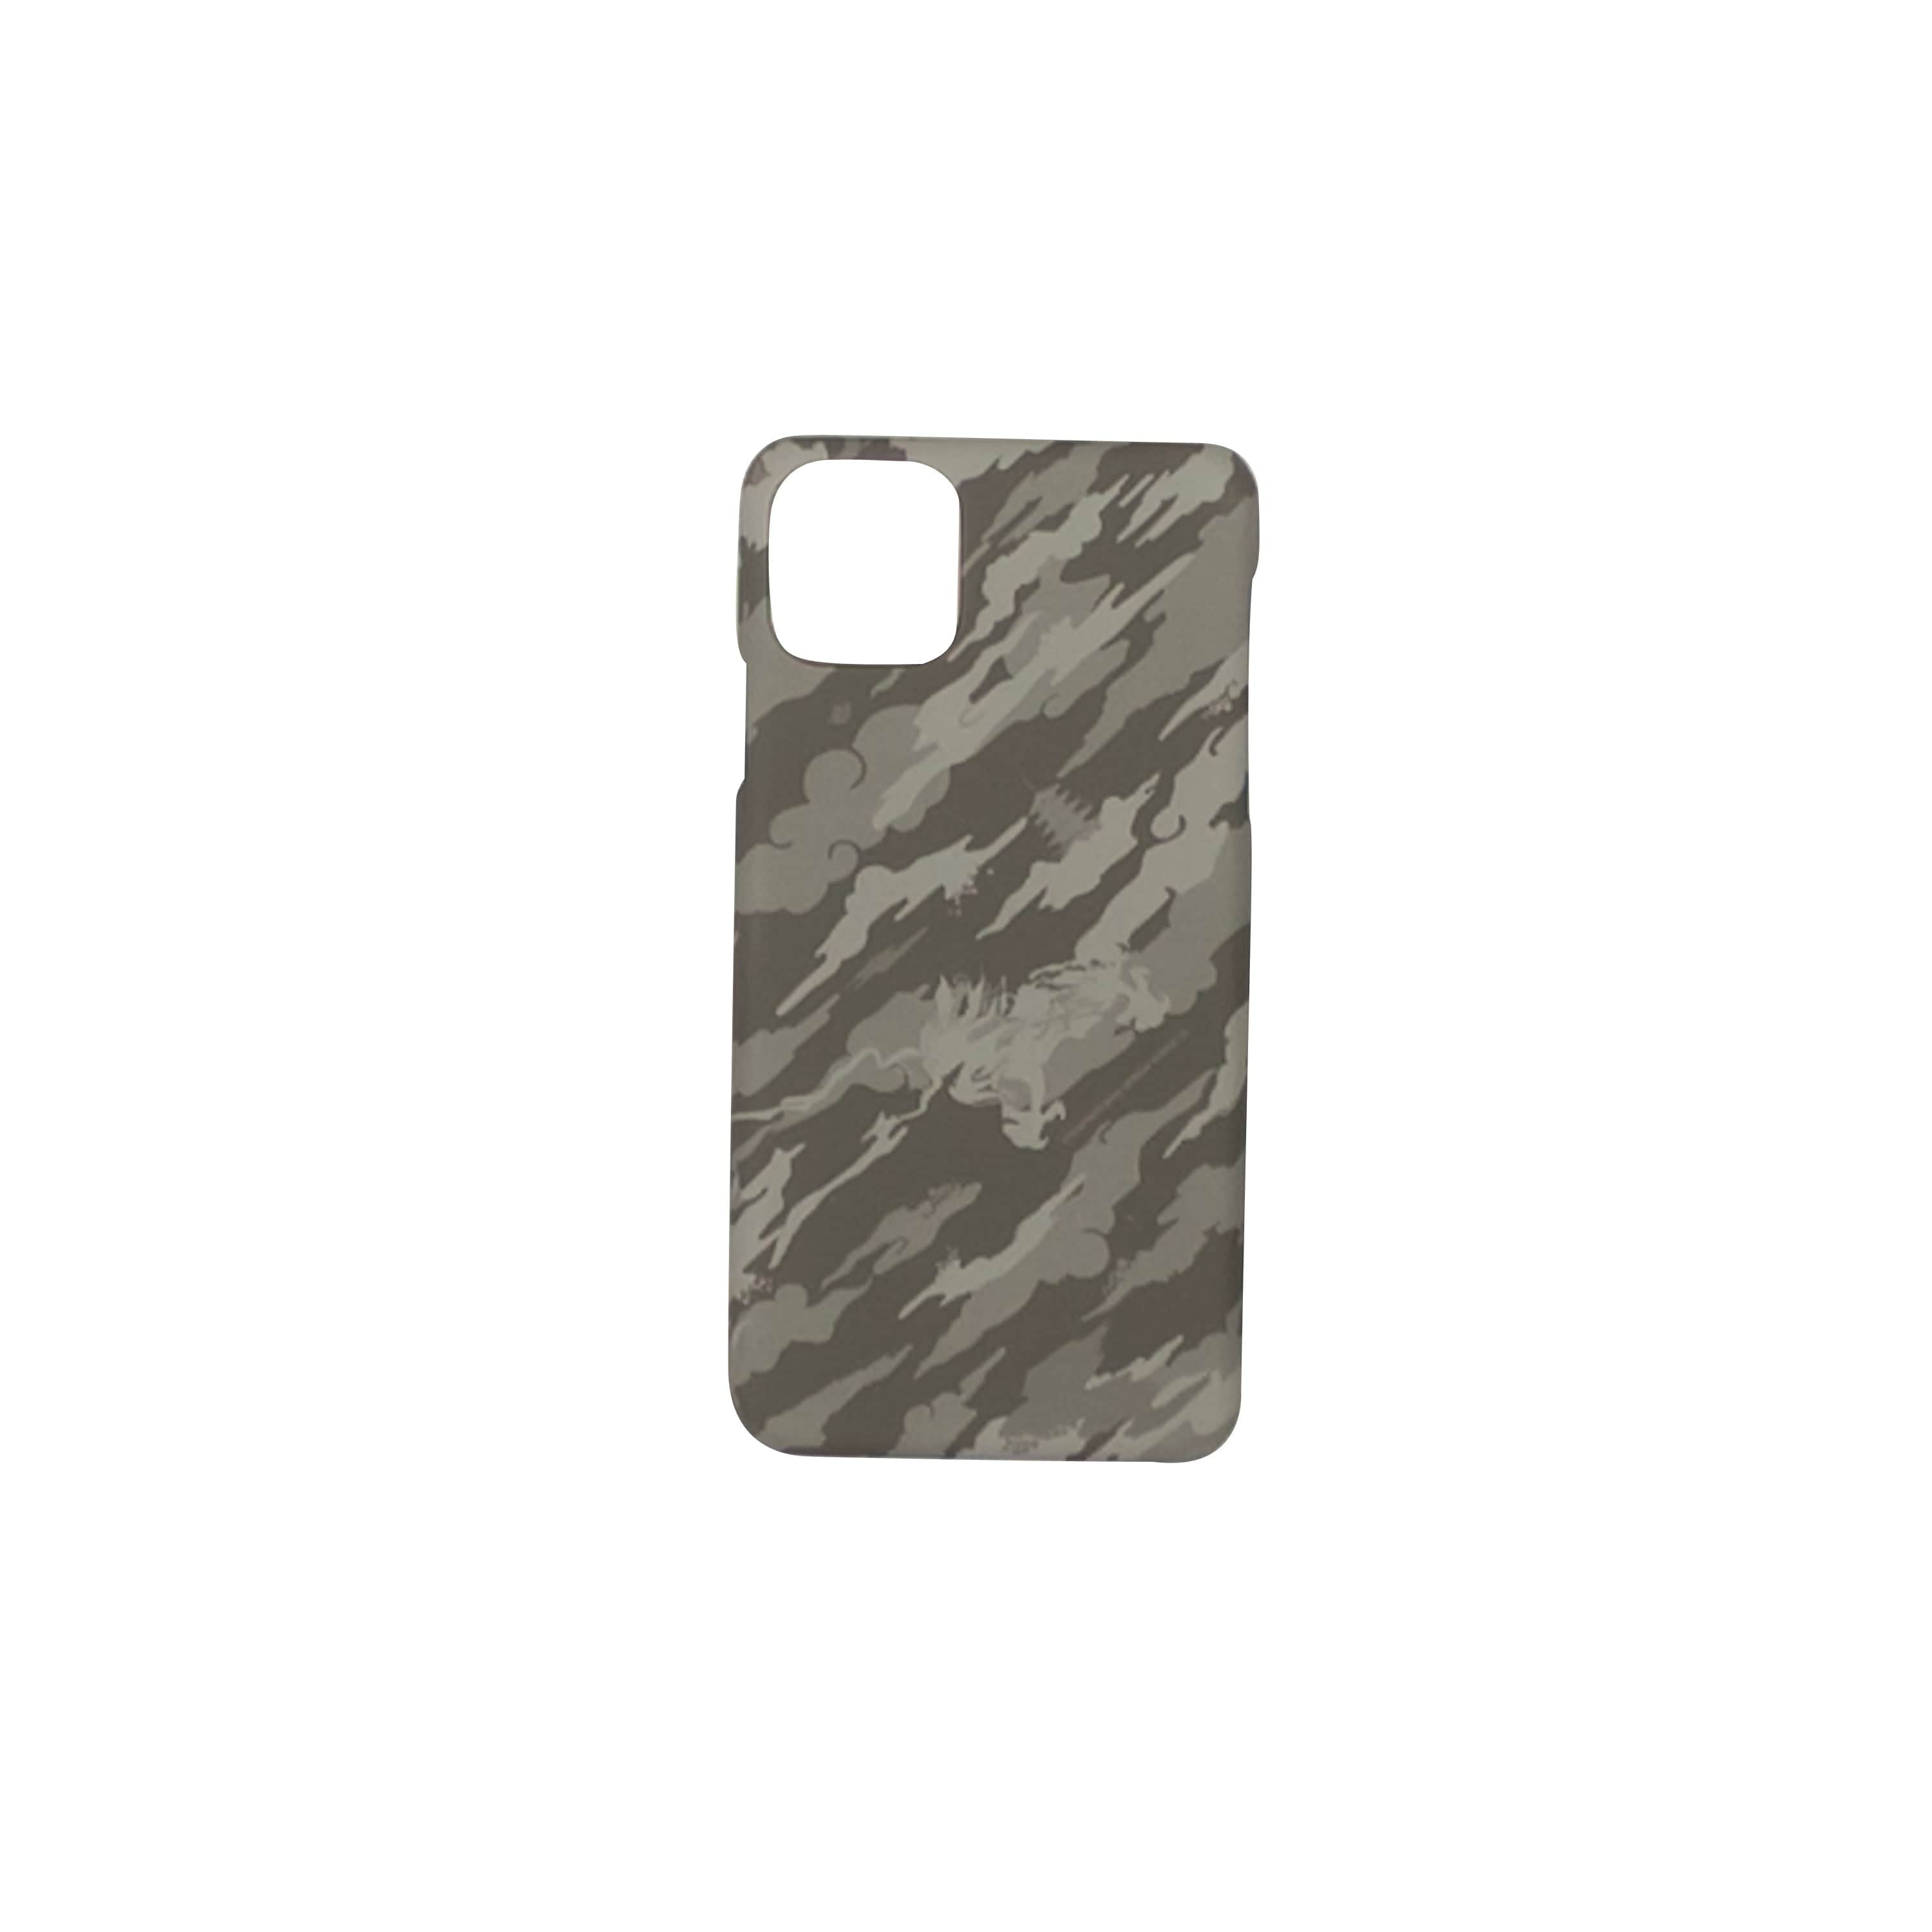 Maharishi channelenable-all, chicmi, couponcollection, gender-mens, gender-womens, maharishi, main-accessories, mens-shoes, phone-tablet-cases, size-os, under-250 OS Grey iPhone 11 Pro Max Knight Phone Case 95-MSI-3007/OS 95-MSI-3007/OS